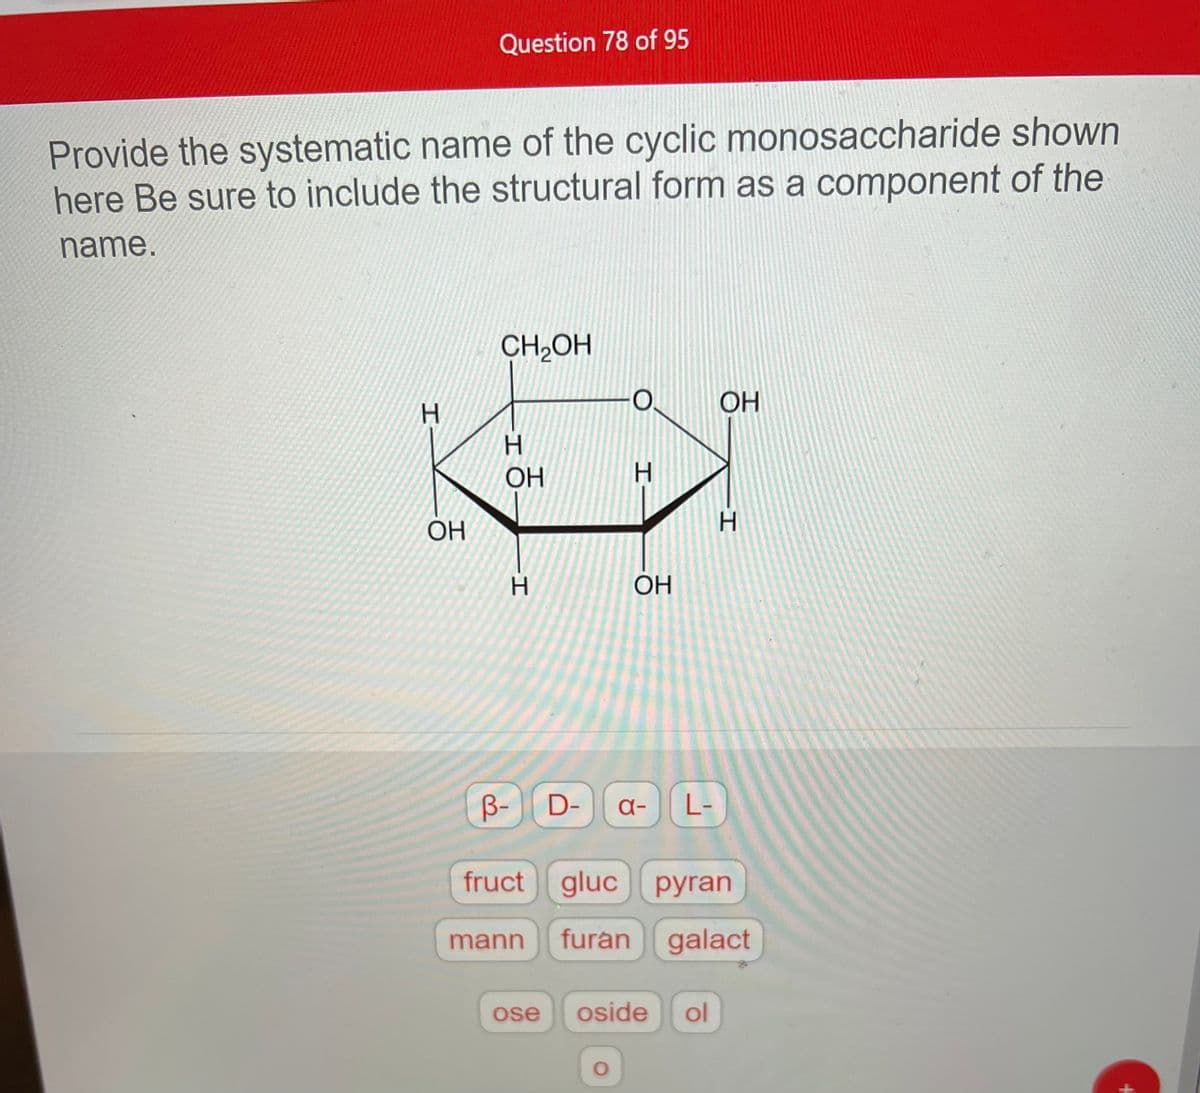 Provide the systematic name of the cyclic monosaccharide shown
here Be sure to include the structural form as a component of the
name.
H
Question 78 of 95
OH
CH₂OH
H
OH
H
mann
H
OH
O
B- D- a- L-
fruct gluc pyran
furan galact
ose oside ol
OH
H